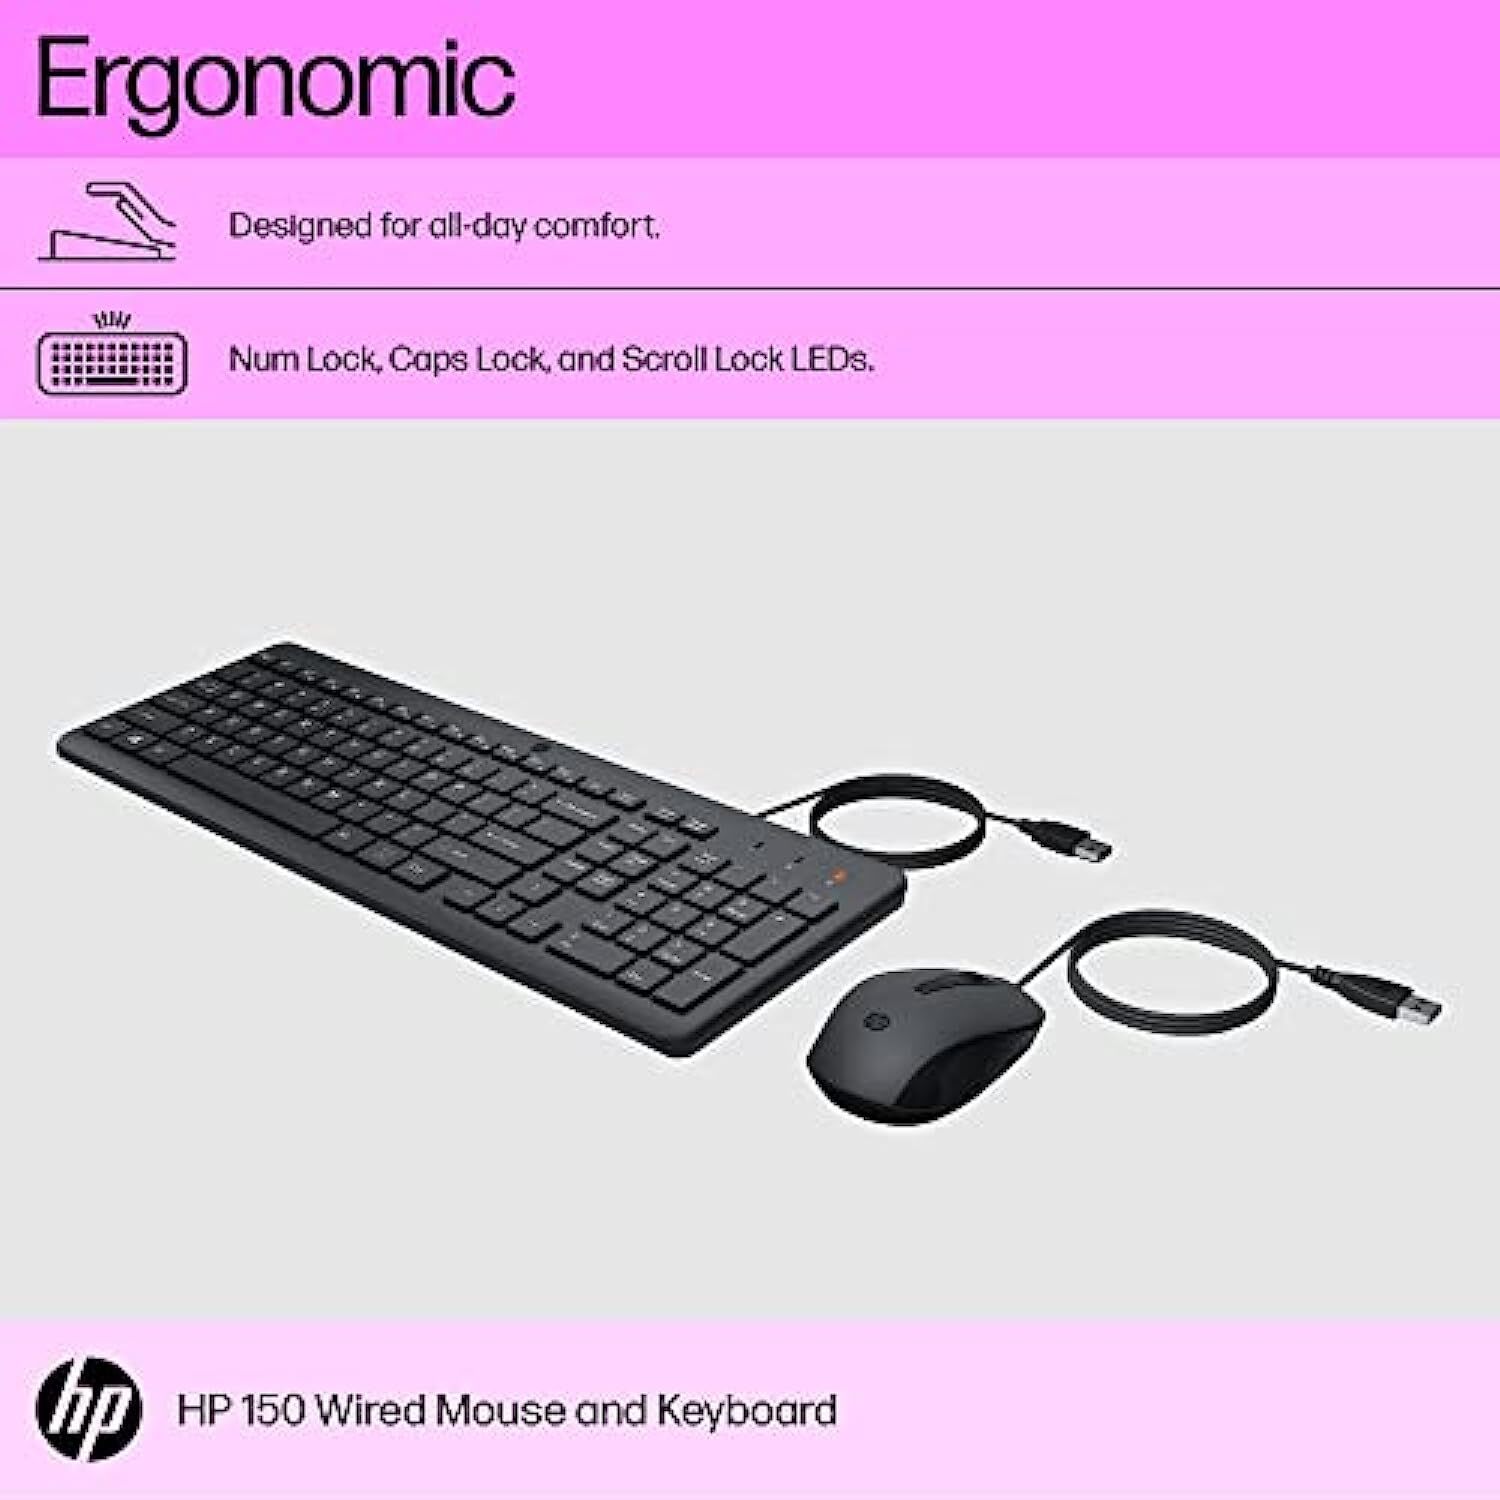 HP 150 Wired Keyboard and Mouse Combo with Instant USB Plug-and-Play Setup, 12 Shortcut Keys, 6° Adjustable Slope Keyboard and 1600 DPI Optical Sensor Mouse (3-Years Warranty, 240J7AA)